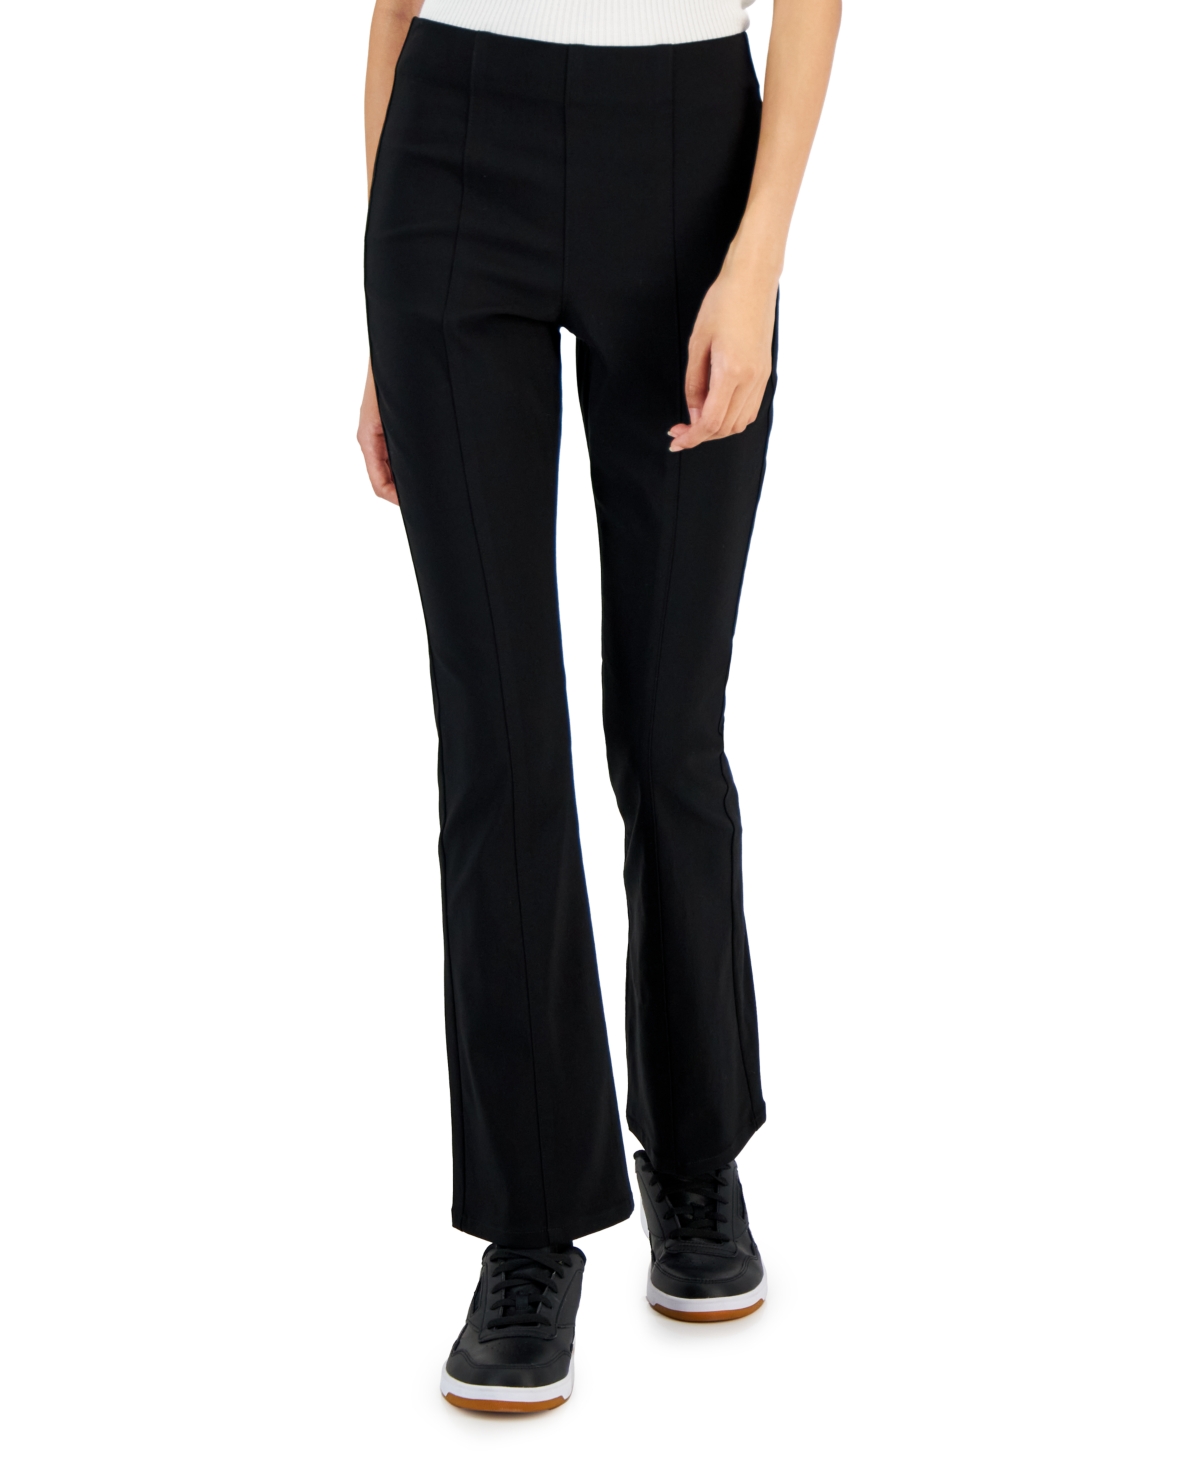 Juniors' Seam-Front Pull-On Flare Jeans - Black